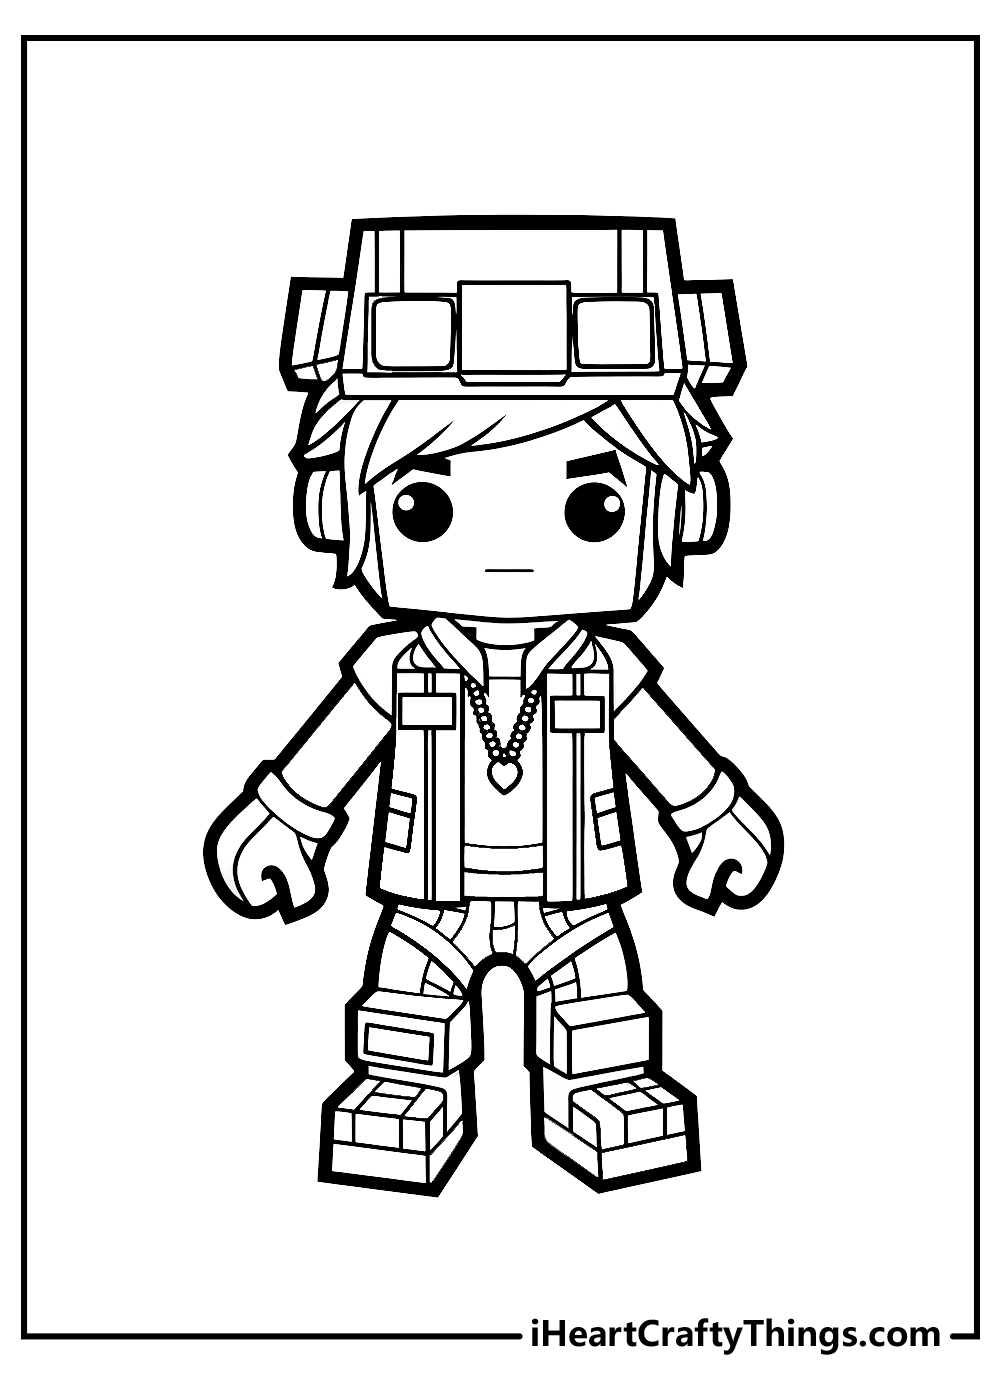 Roblox Dominus coloring page - Download, Print or Color Online for Free